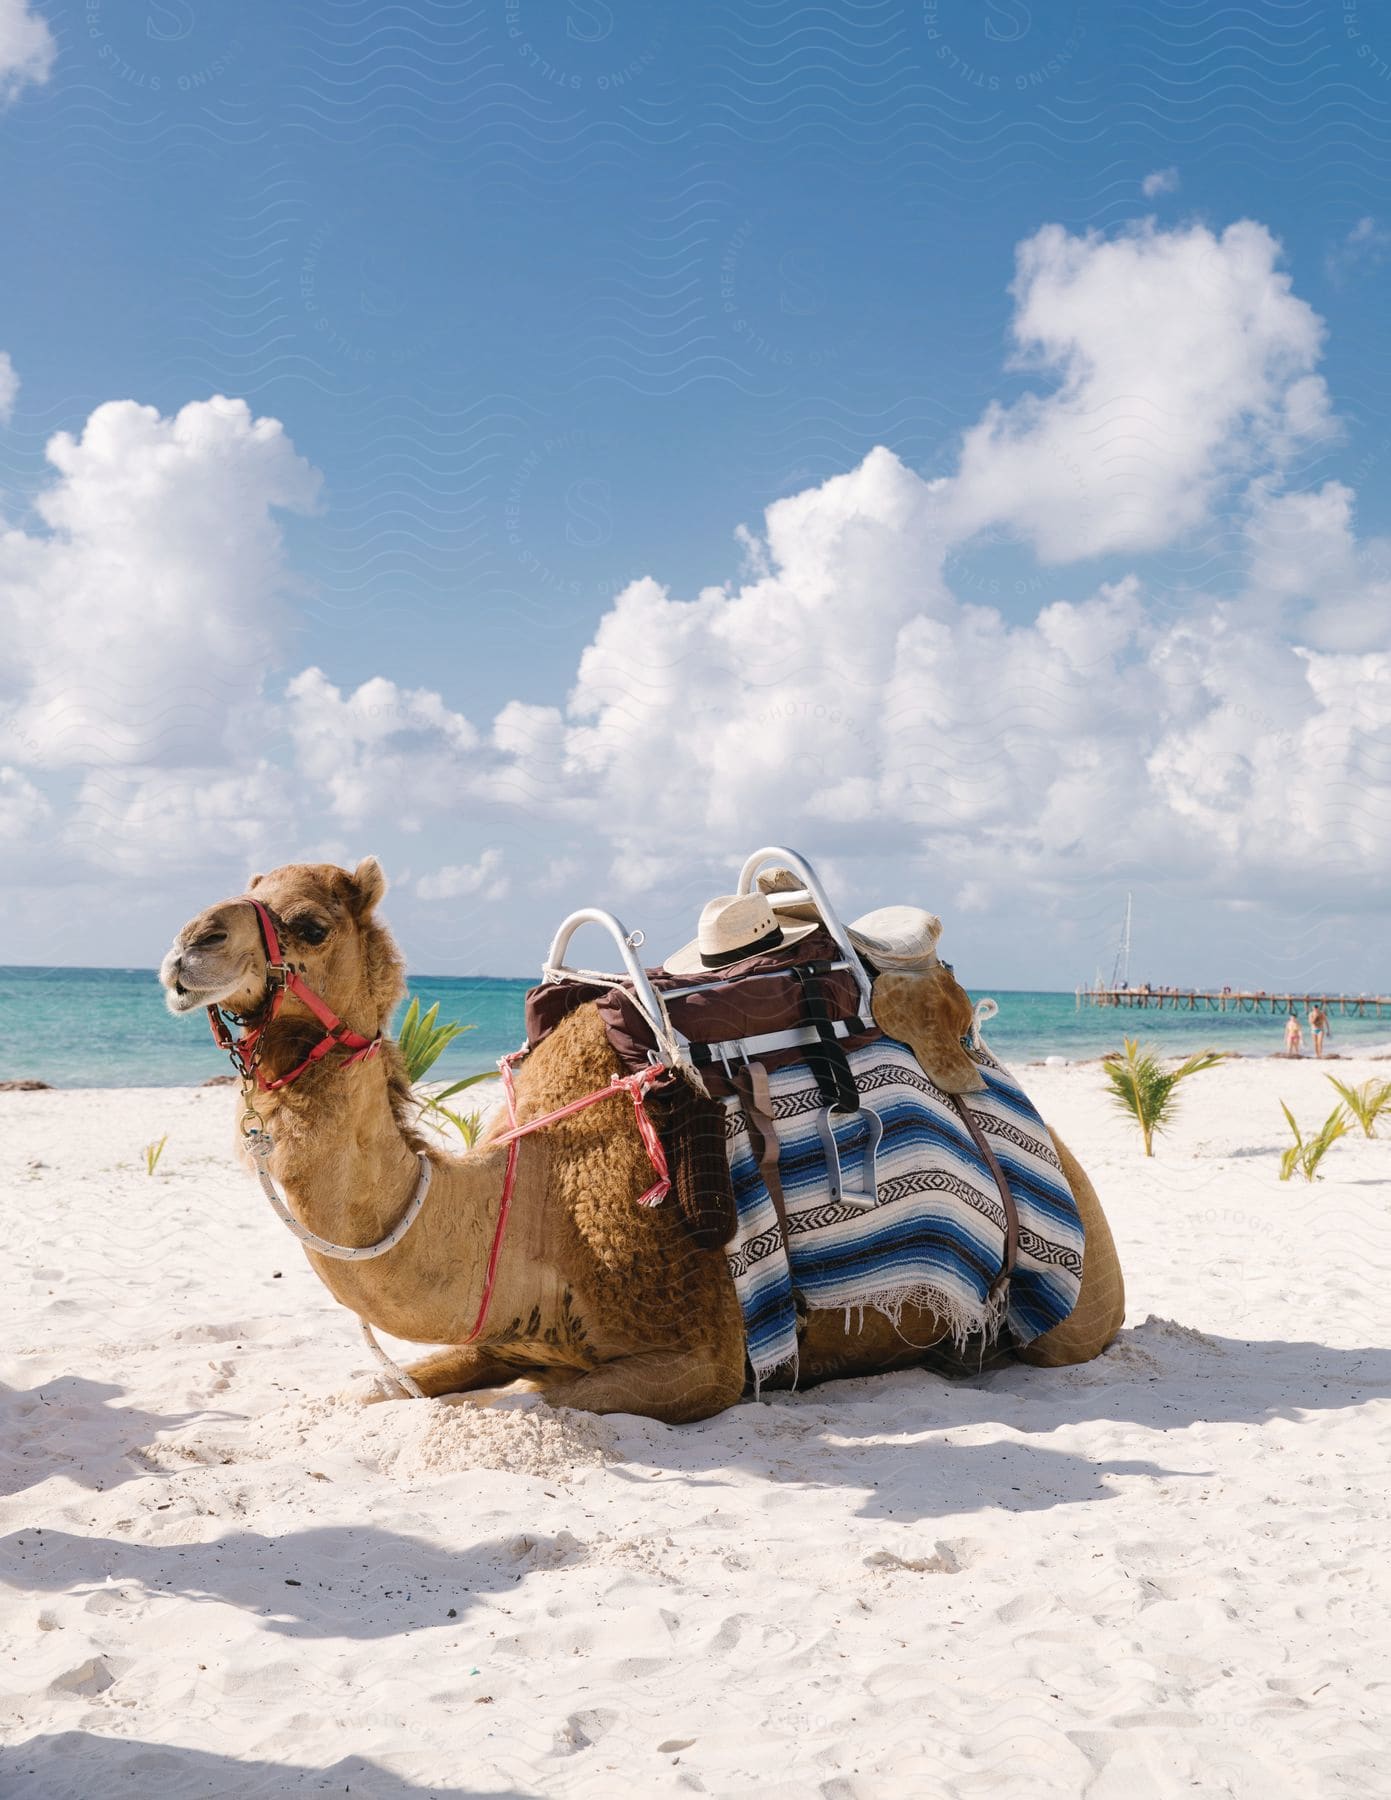 A camel with a saddle resting on white sand on a beach next to the ocean during the daytime